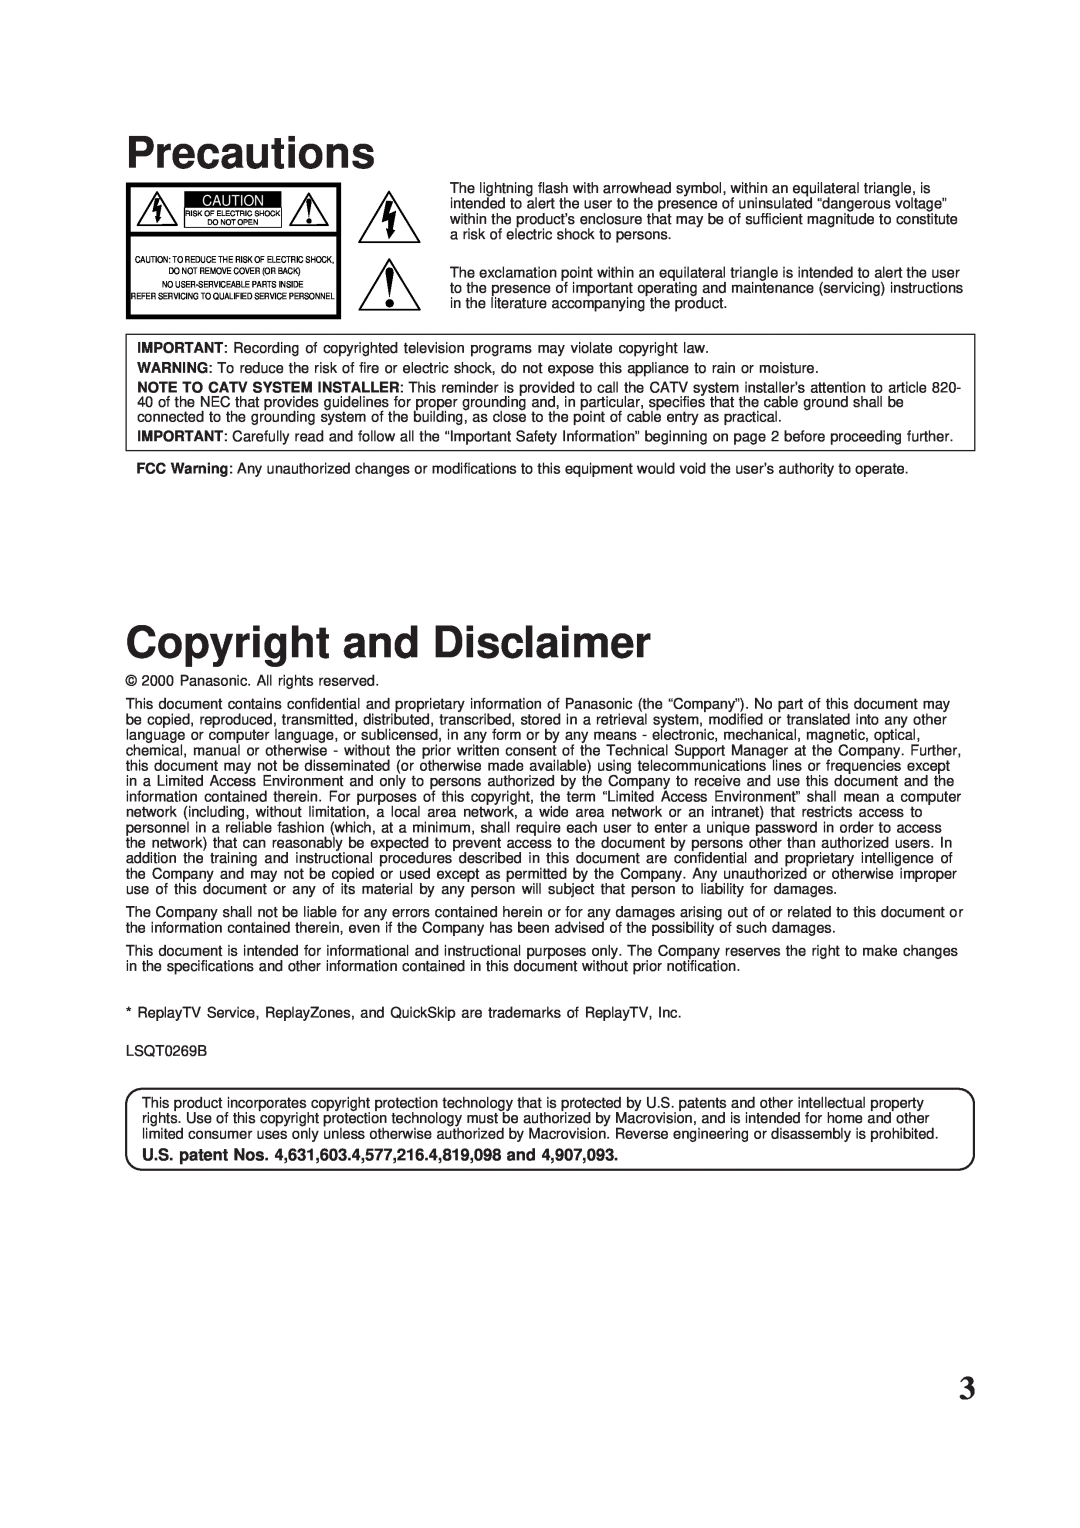 Panasonic PV-HS2000 Precautions, Copyright and Disclaimer, U.S. patent Nos. 4,631,603.4,577,216.4,819,098 and 4,907,093 